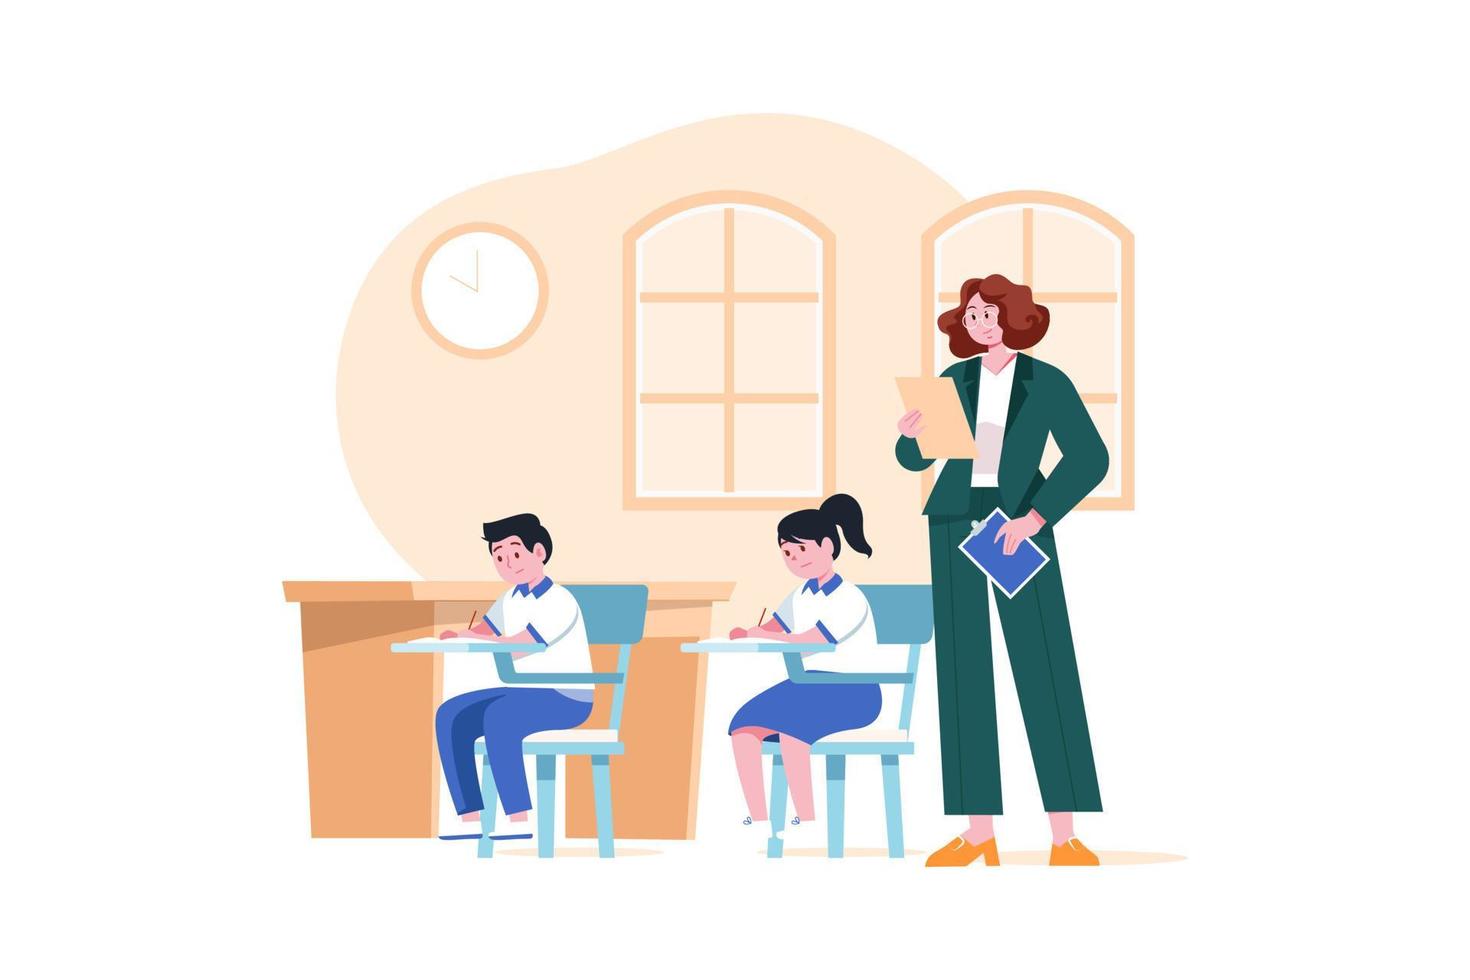 A test administrator oversees students while they take a test Illustration concept on white background vector